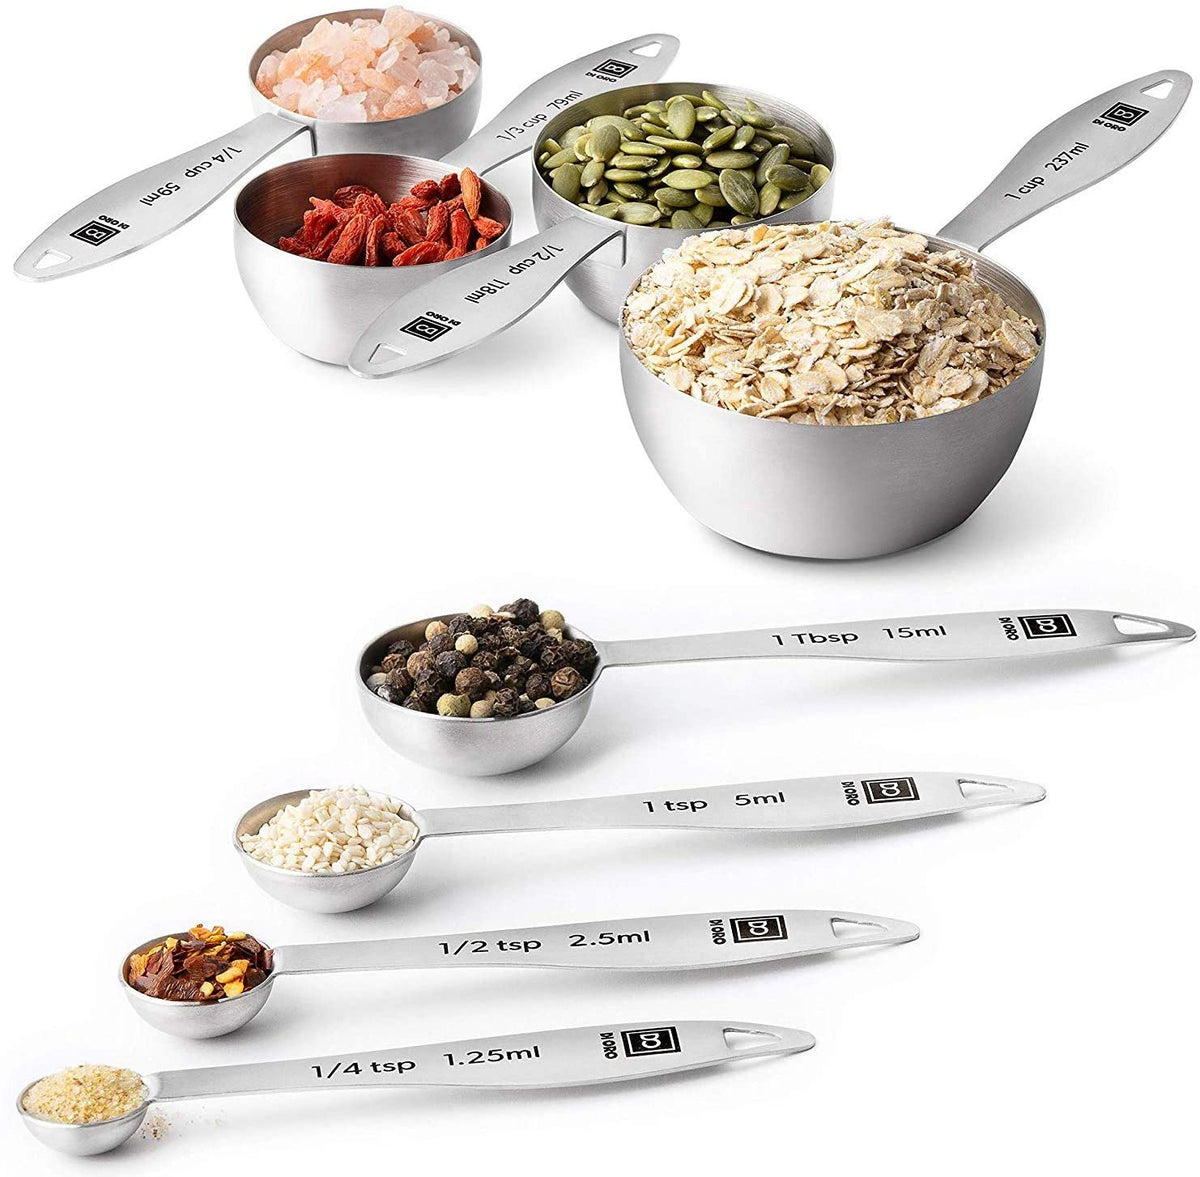 DI ORO Stainless Steel Measuring Cups - Metal Measuring Cups - Food Grade  8-Piece Kitchen Measuring Cup & Spoon Set - Liquid Measuring Cups & Spoons